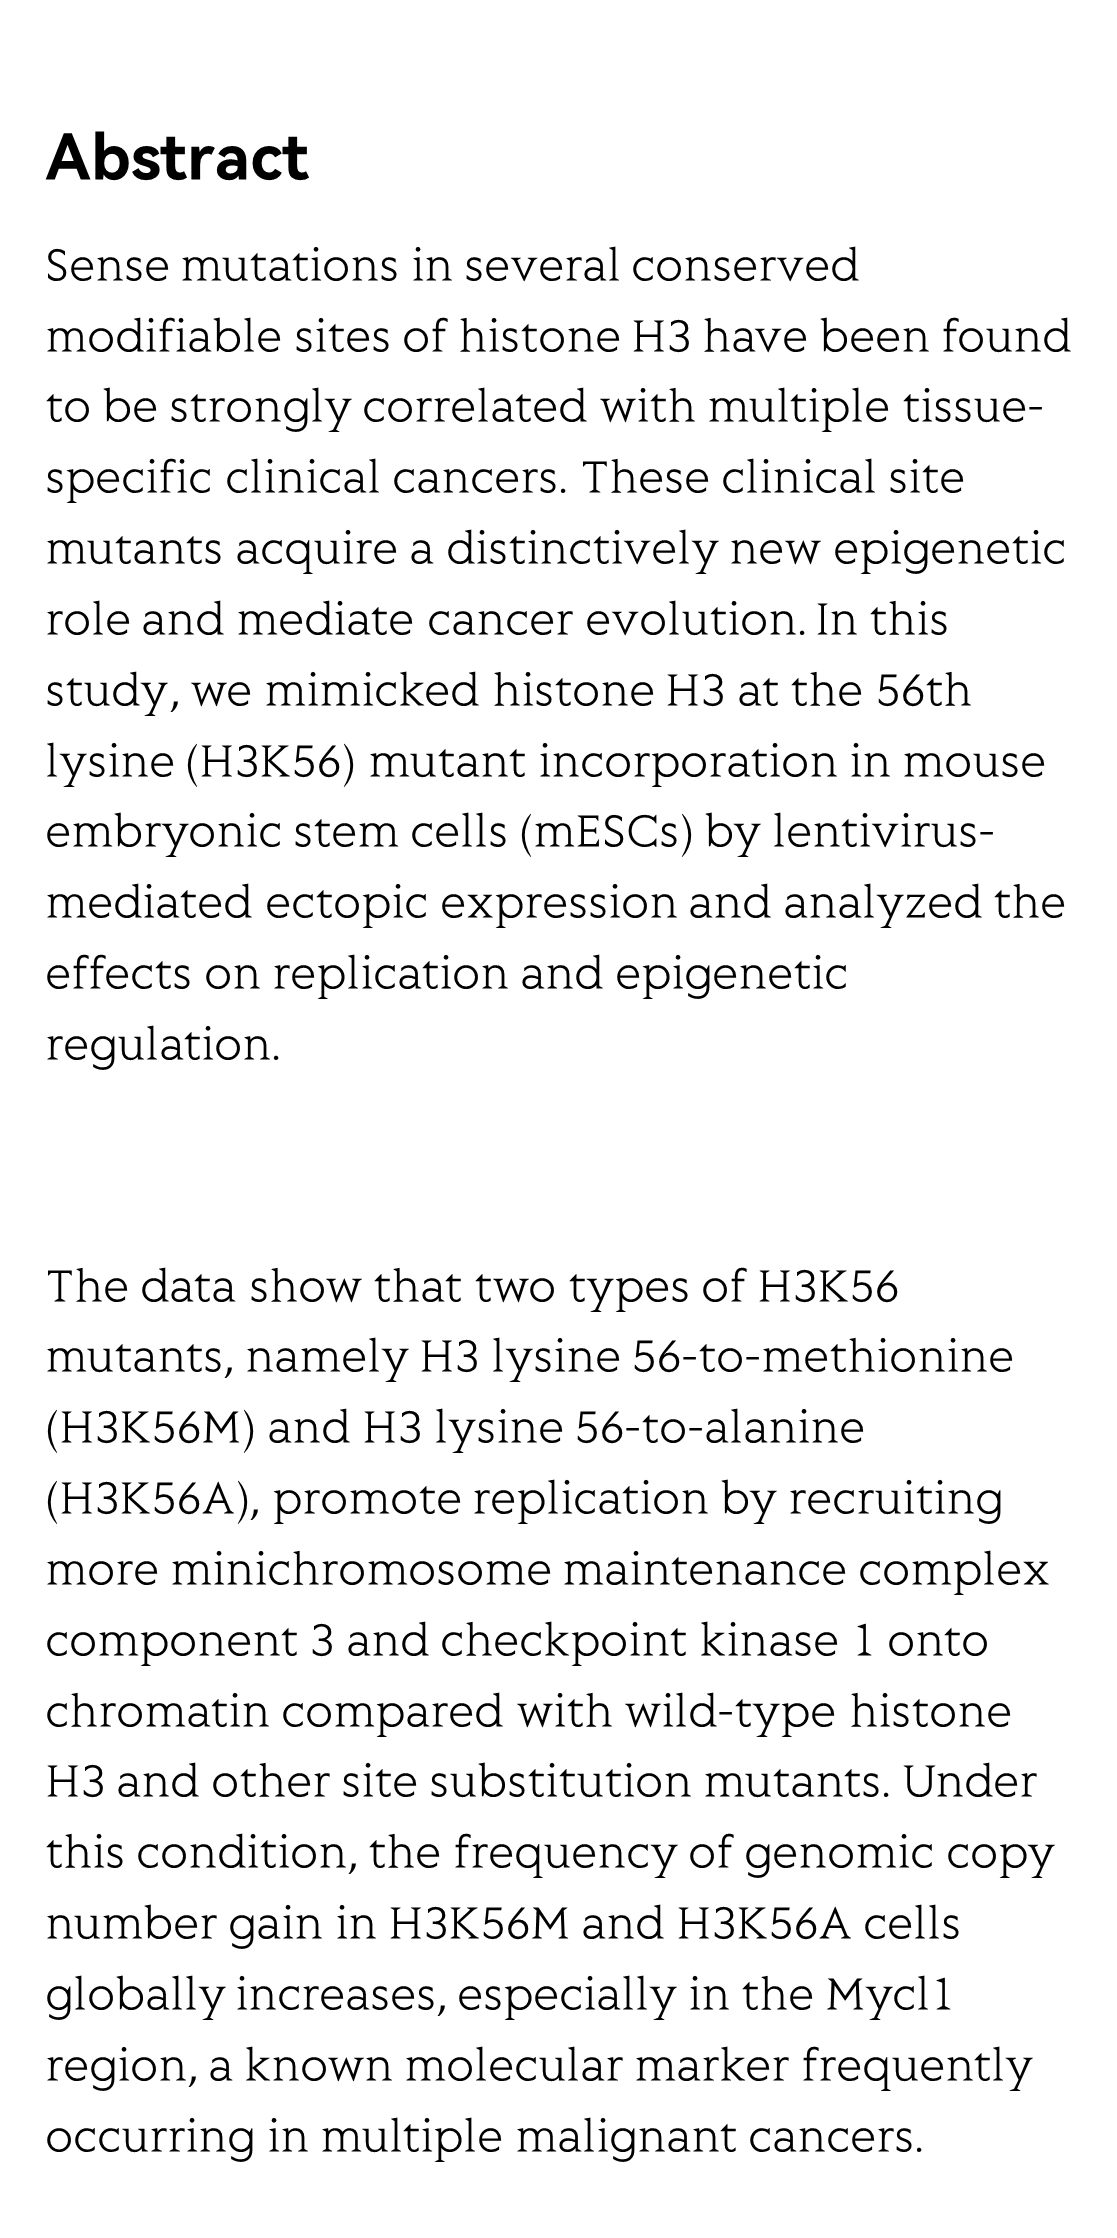 Incorporation of a histone mutant with H3K56 site substitution perturbs the replication machinery in mouse embryonic stem cells_2